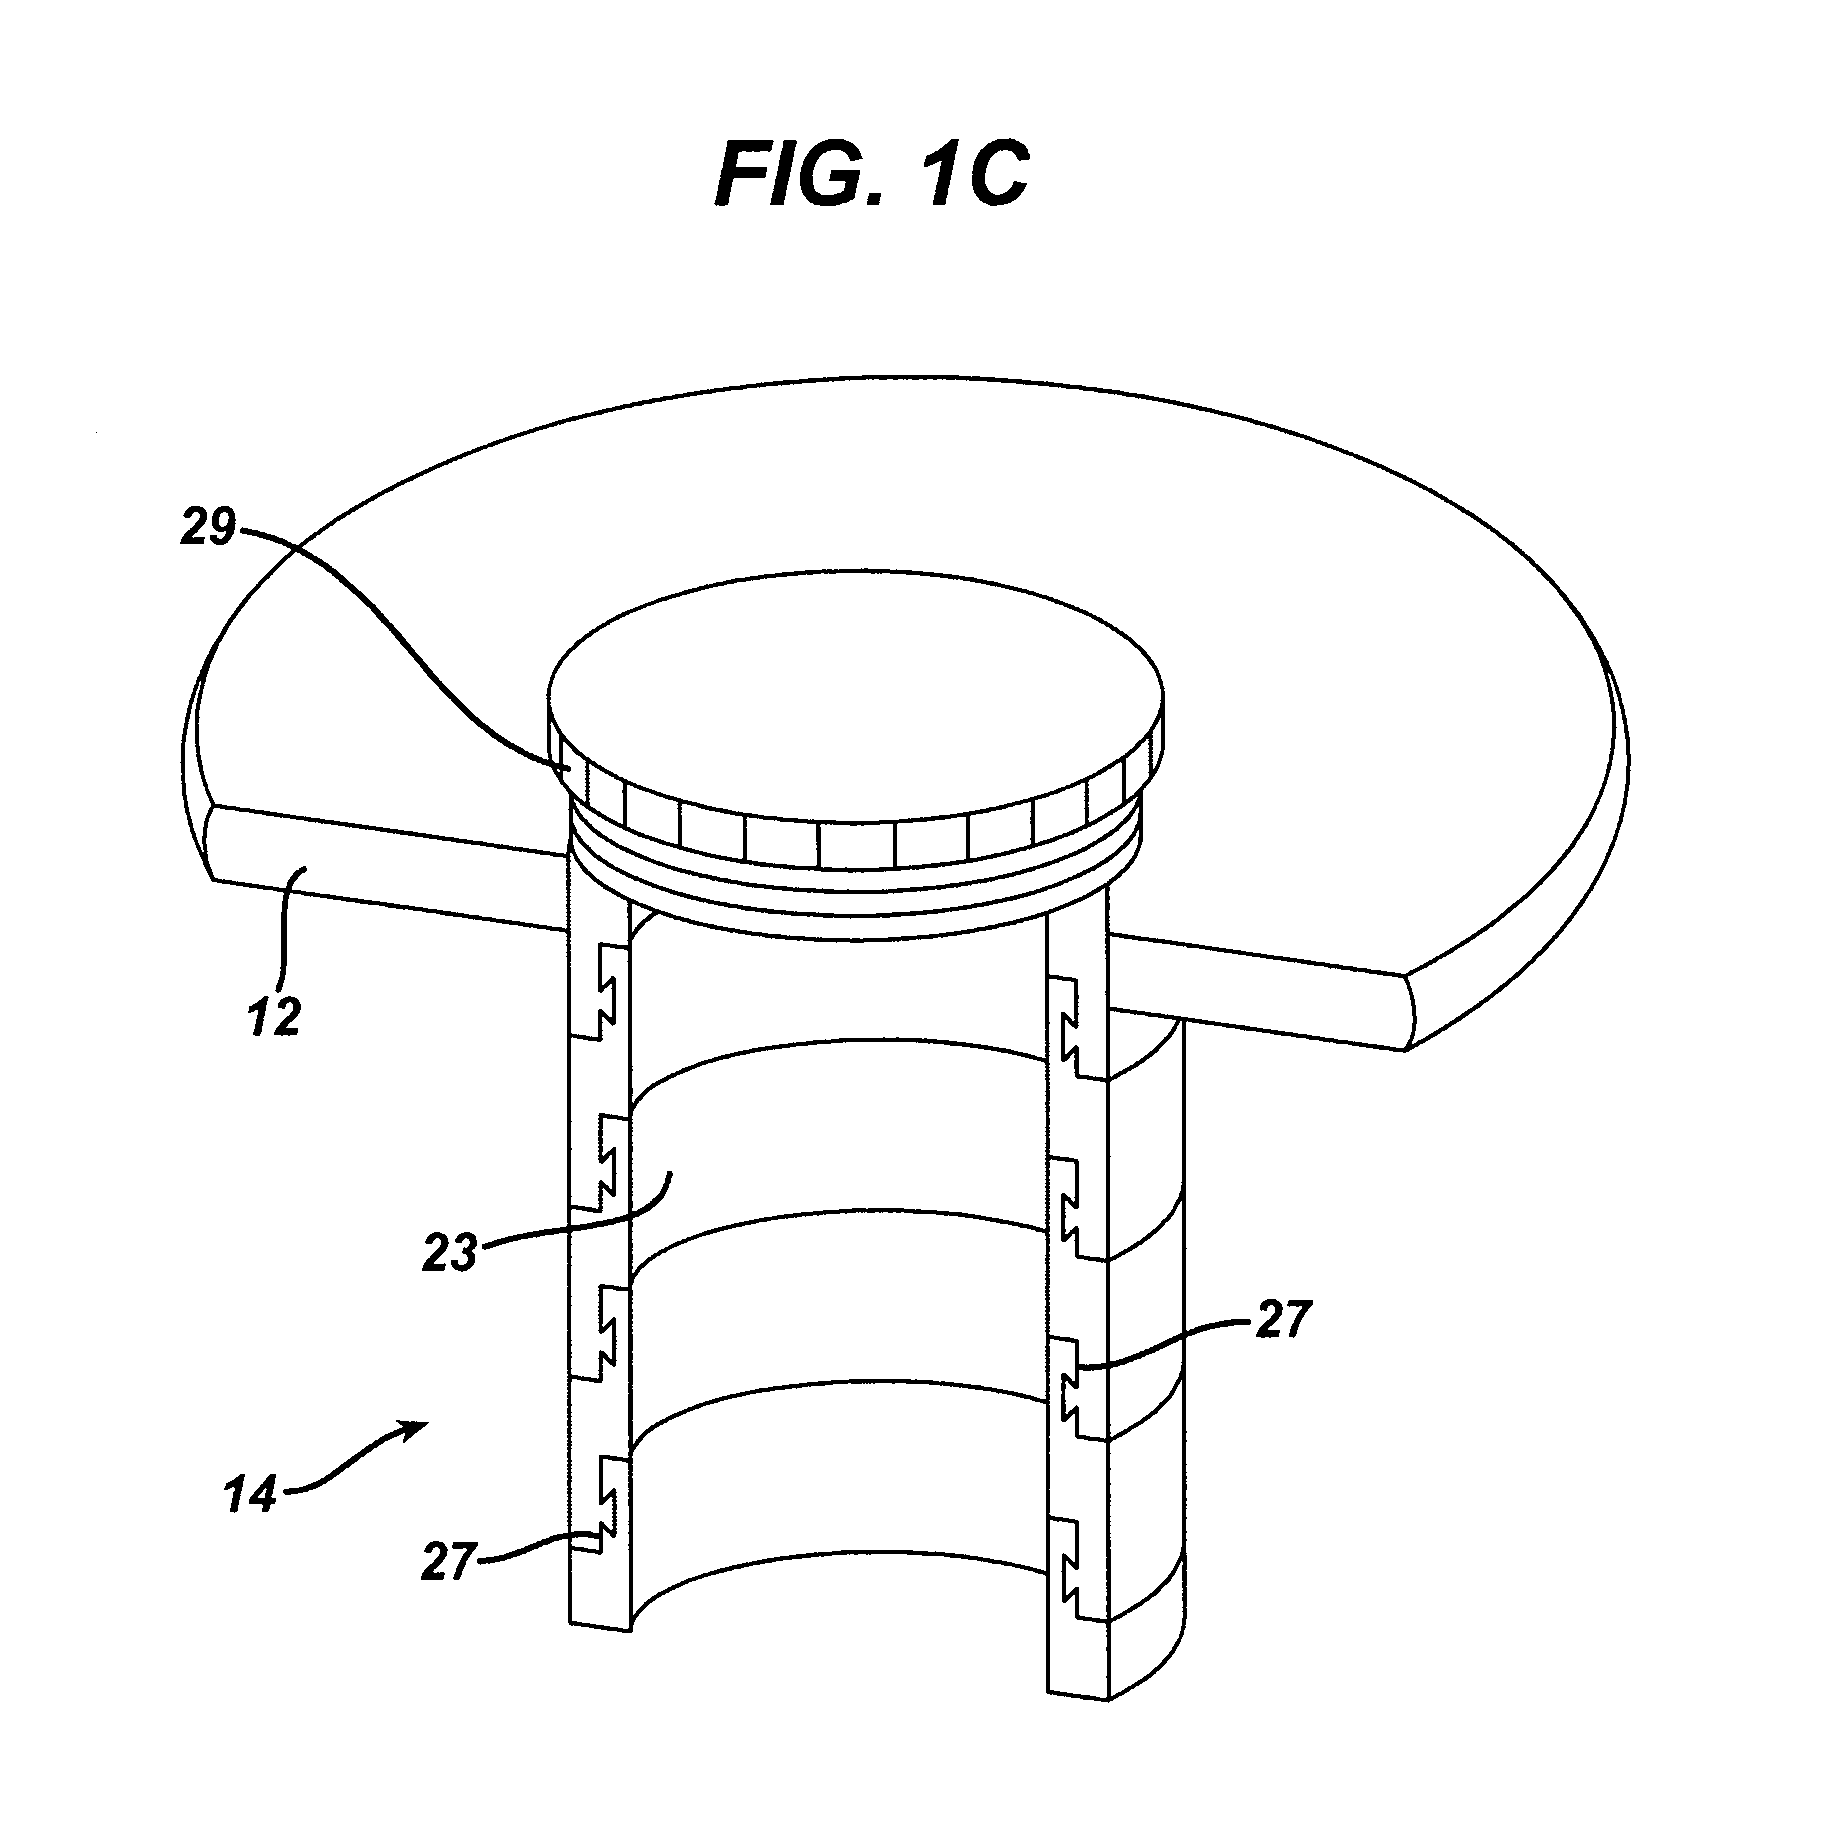 Methods and Devices for Providing Access into a Body Cavity